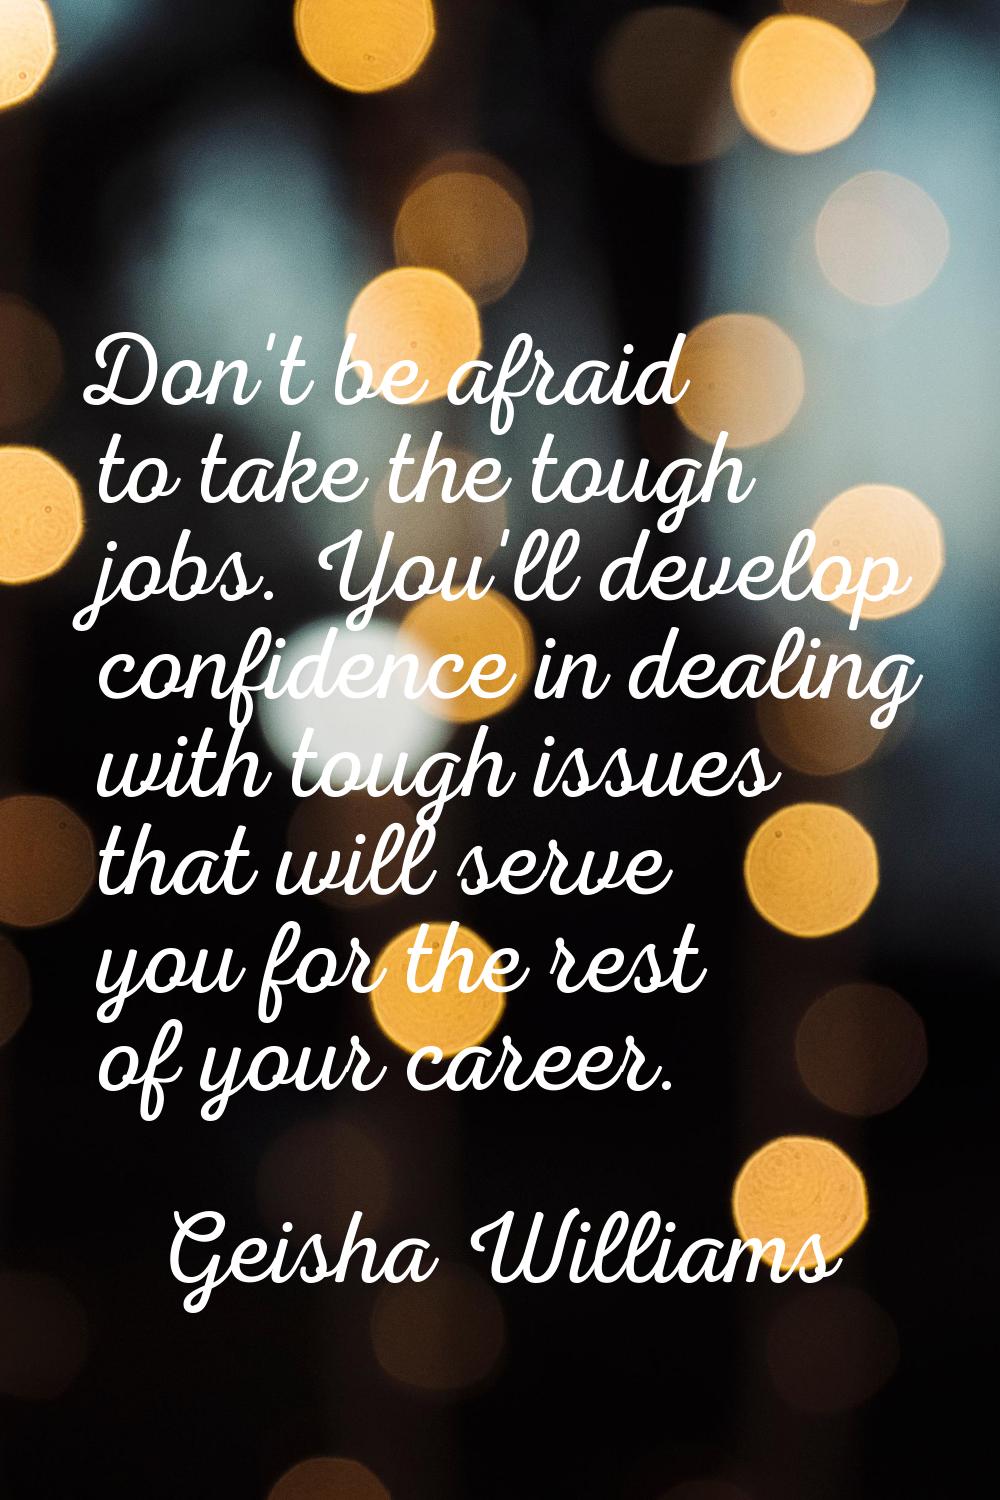 Don't be afraid to take the tough jobs. You'll develop confidence in dealing with tough issues that